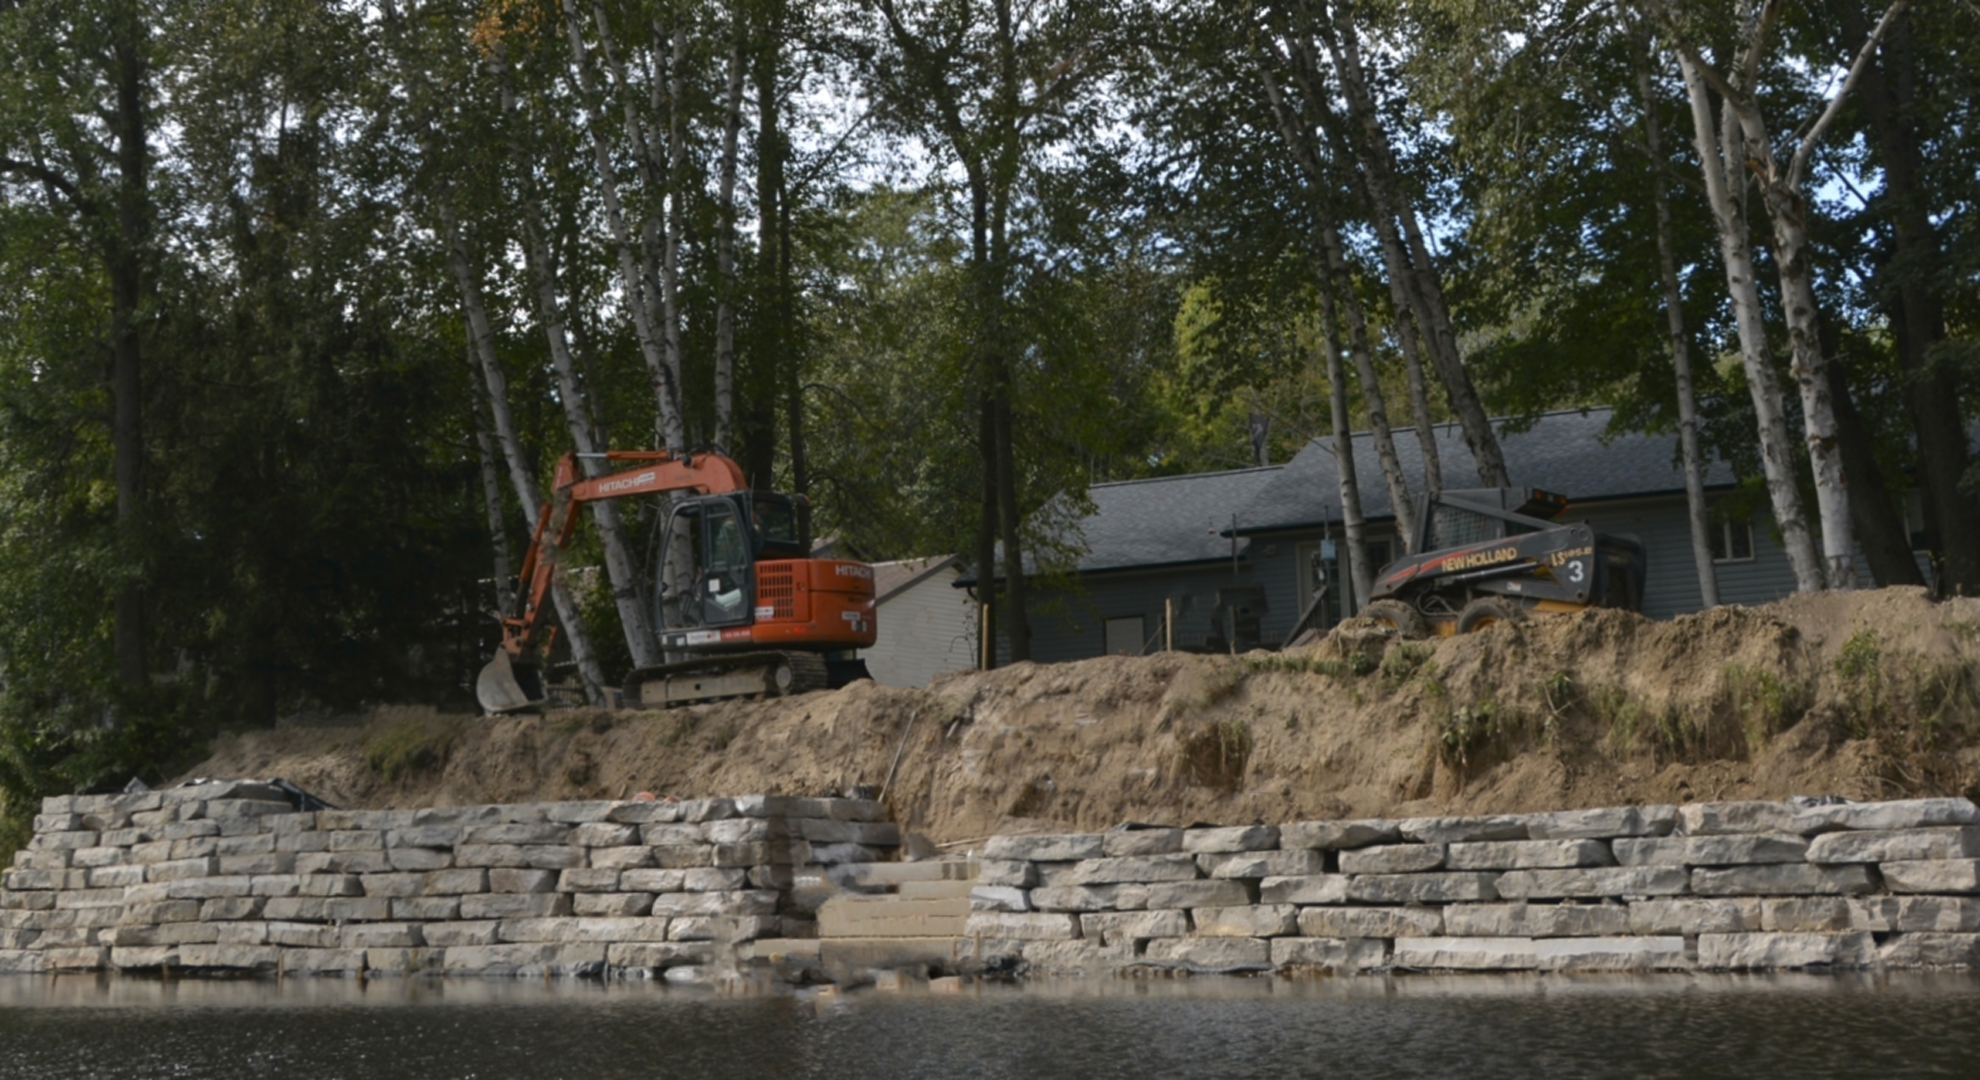 Shoreline Protection Retaining Wall Project with J.C. Rock Perfect Fit Armour Stone